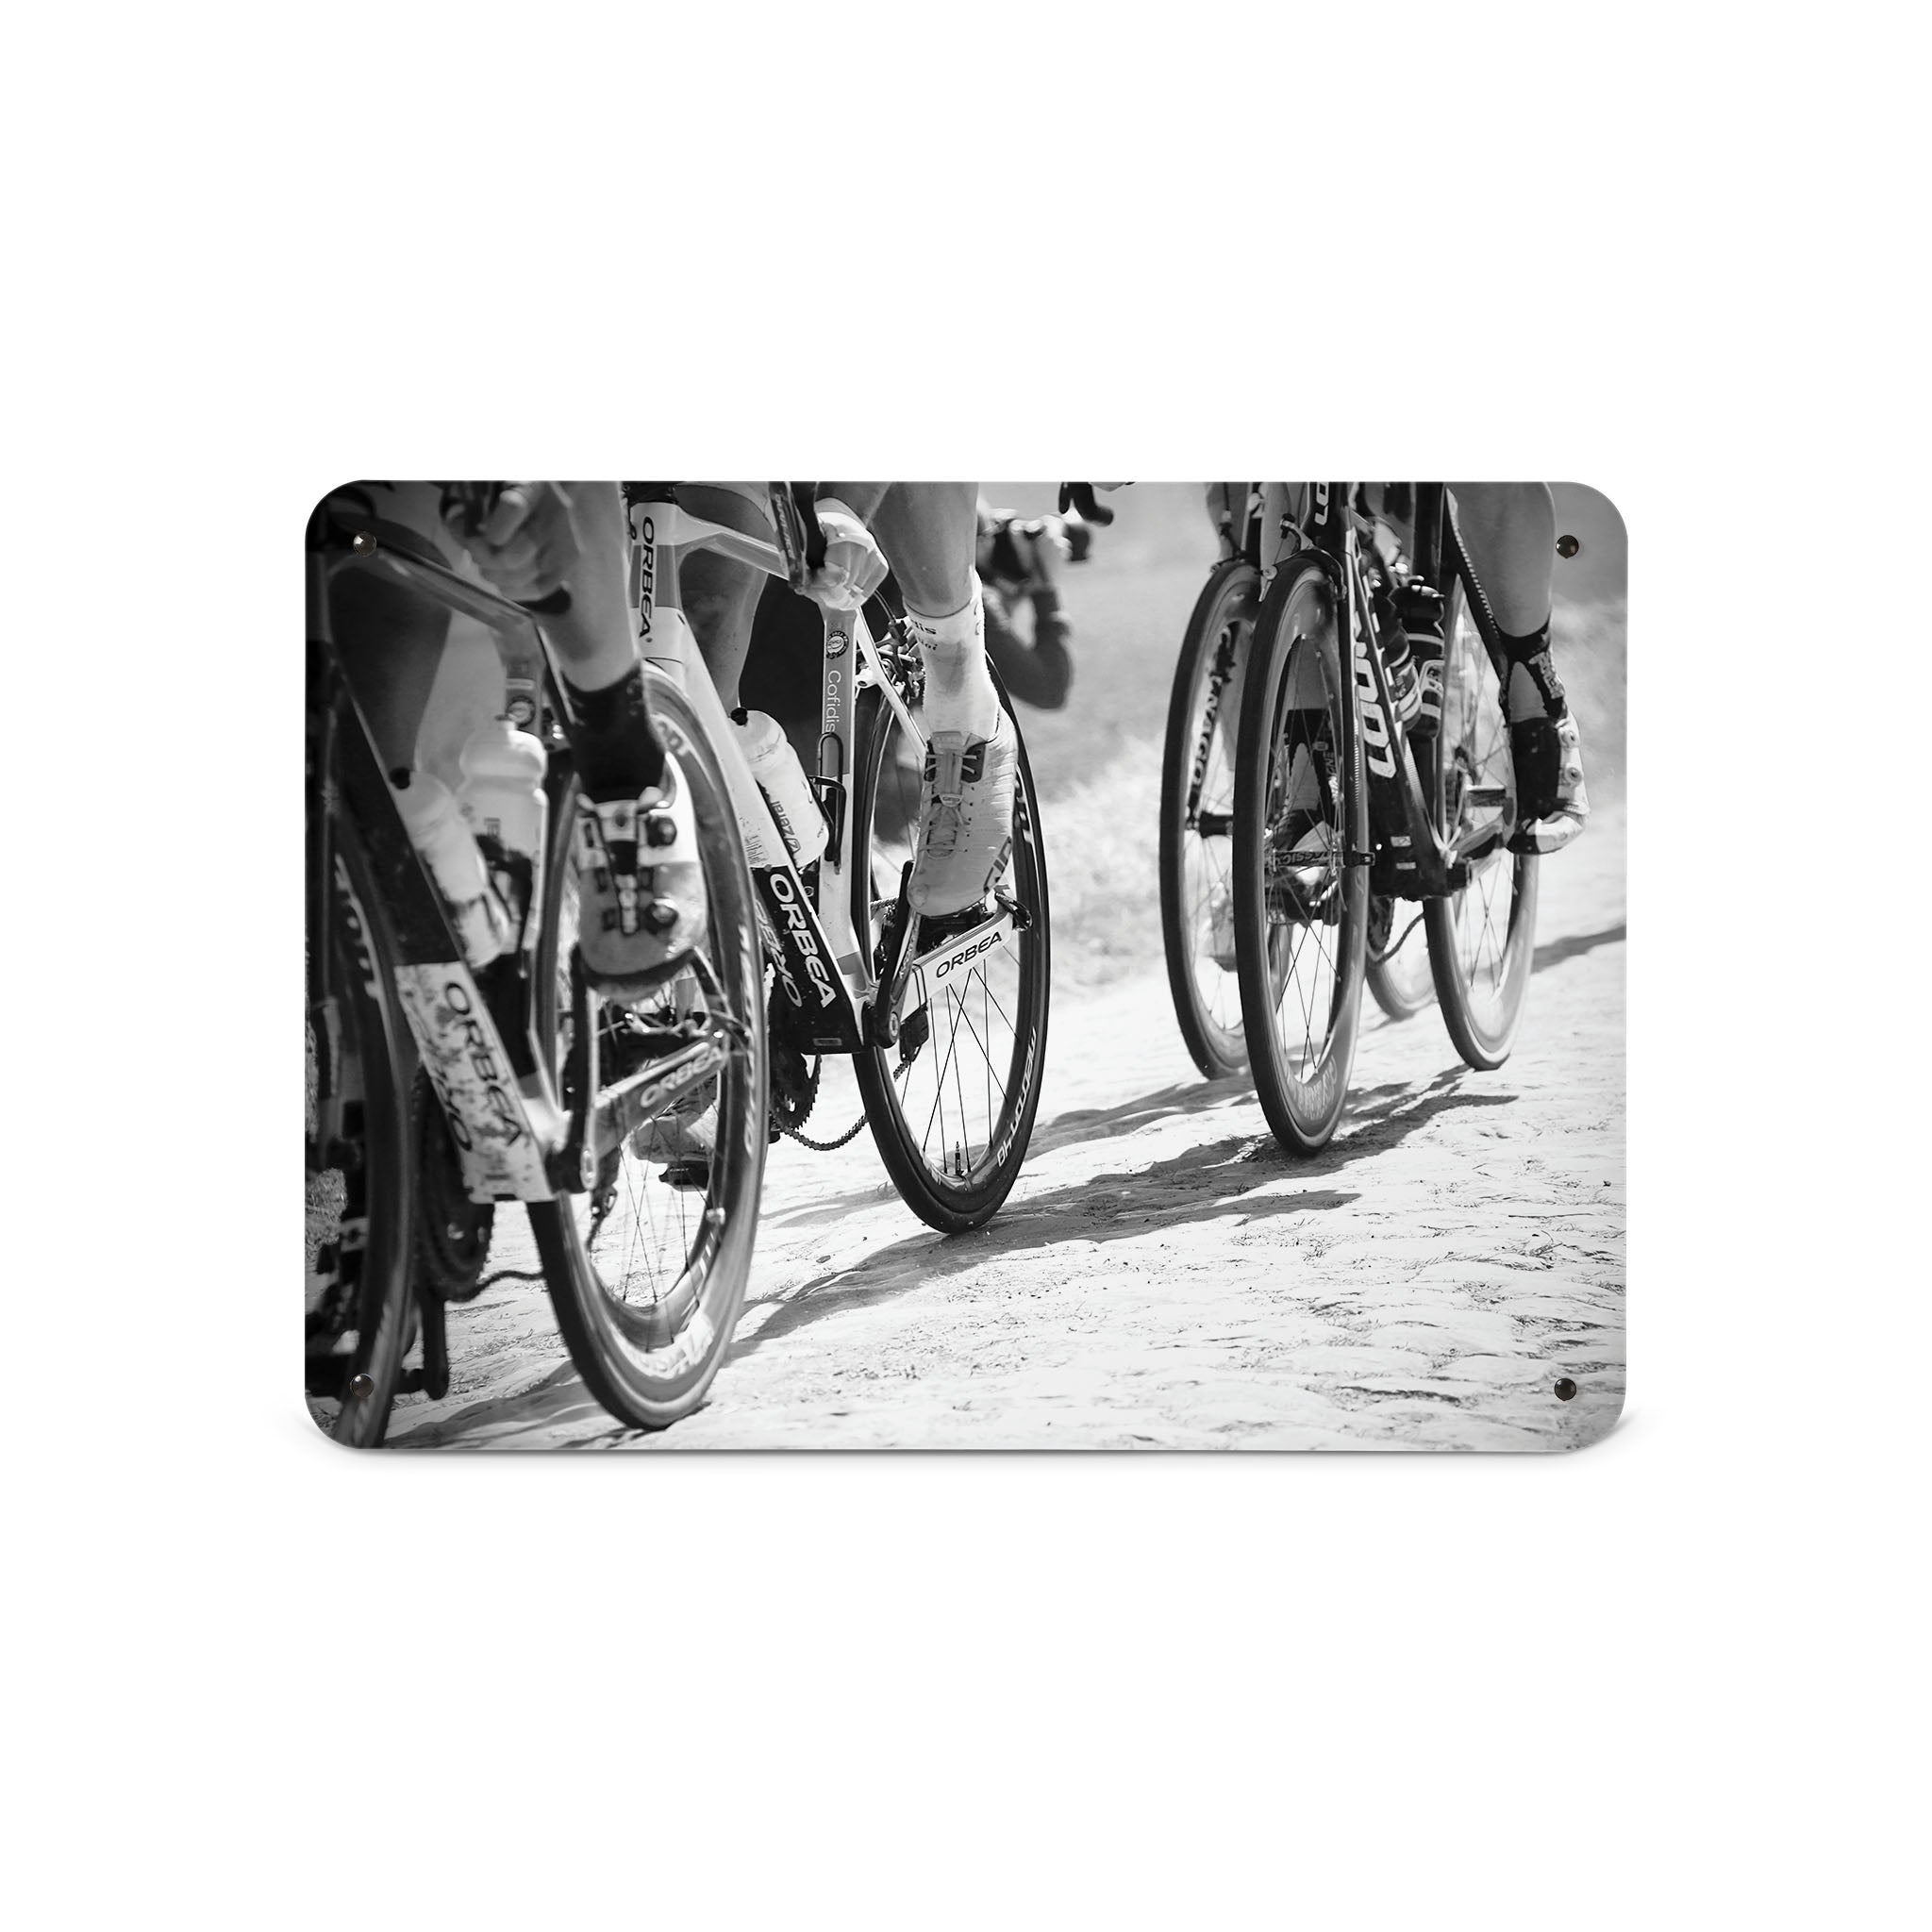 A medium magnetic notice board by Beyond the Fridge with a black and white image of cyclists focusing on the wheels of the bikes